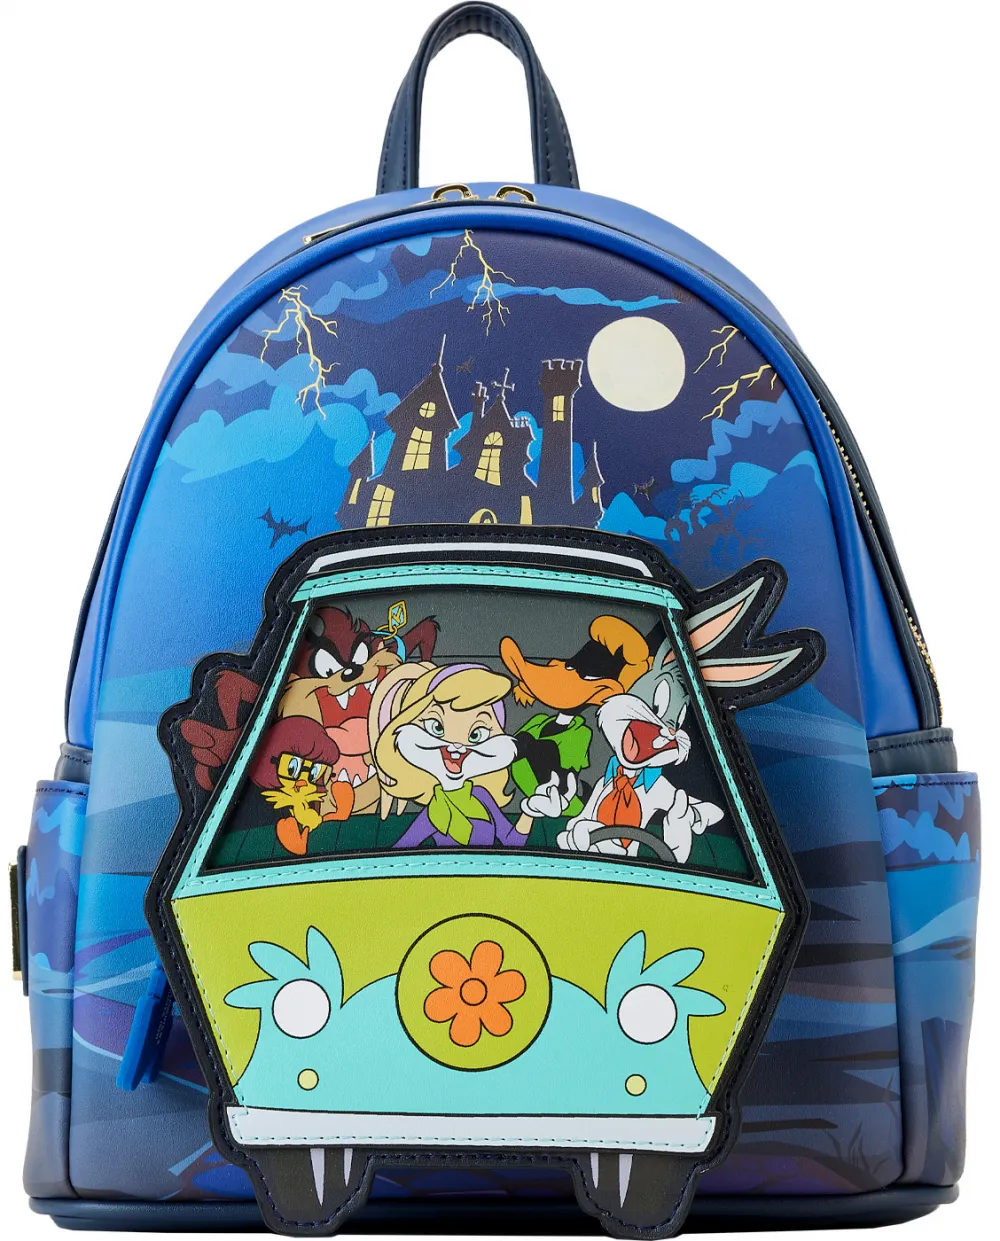 Warner Bros 100th Anniversary Looney Tunes & Scooby-Doo Glow Mini Backpack Loungefly